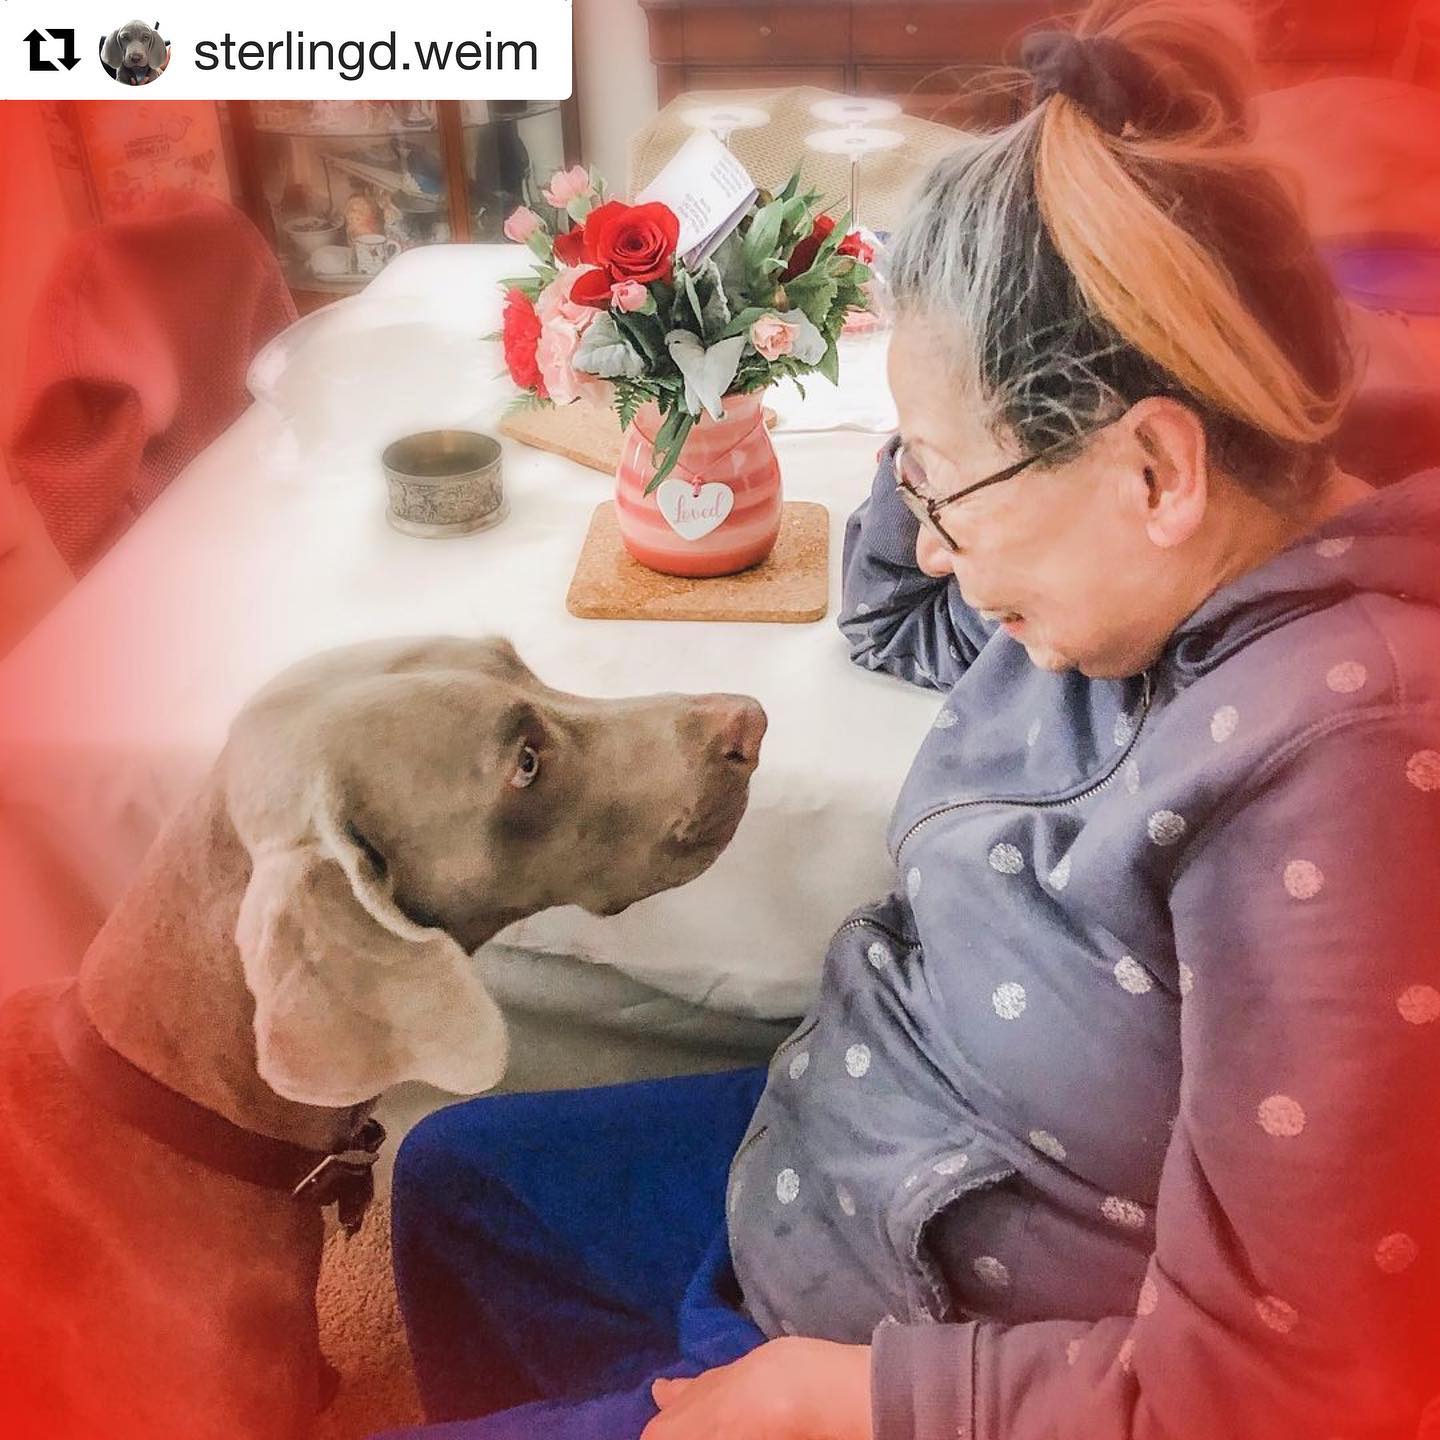 Happy Hearts Day! Sterling’s Valentine is my mummy. ️#Repost @sterlingd.weim with @get_repost・・・This weekend is “Valentine’s” Day (idk who that is) and mum said I should pick a “Valentine” and obvs I chose my Mommels because she’s the bestest in the world. ️️ Her fav are flowers so I went on the internets to get her some #goodestboi #sorrymum #ilovemygrandma #weimaraner #dogsofinsta #valentines #valetinesgift #ftd #weimlove [instagram]